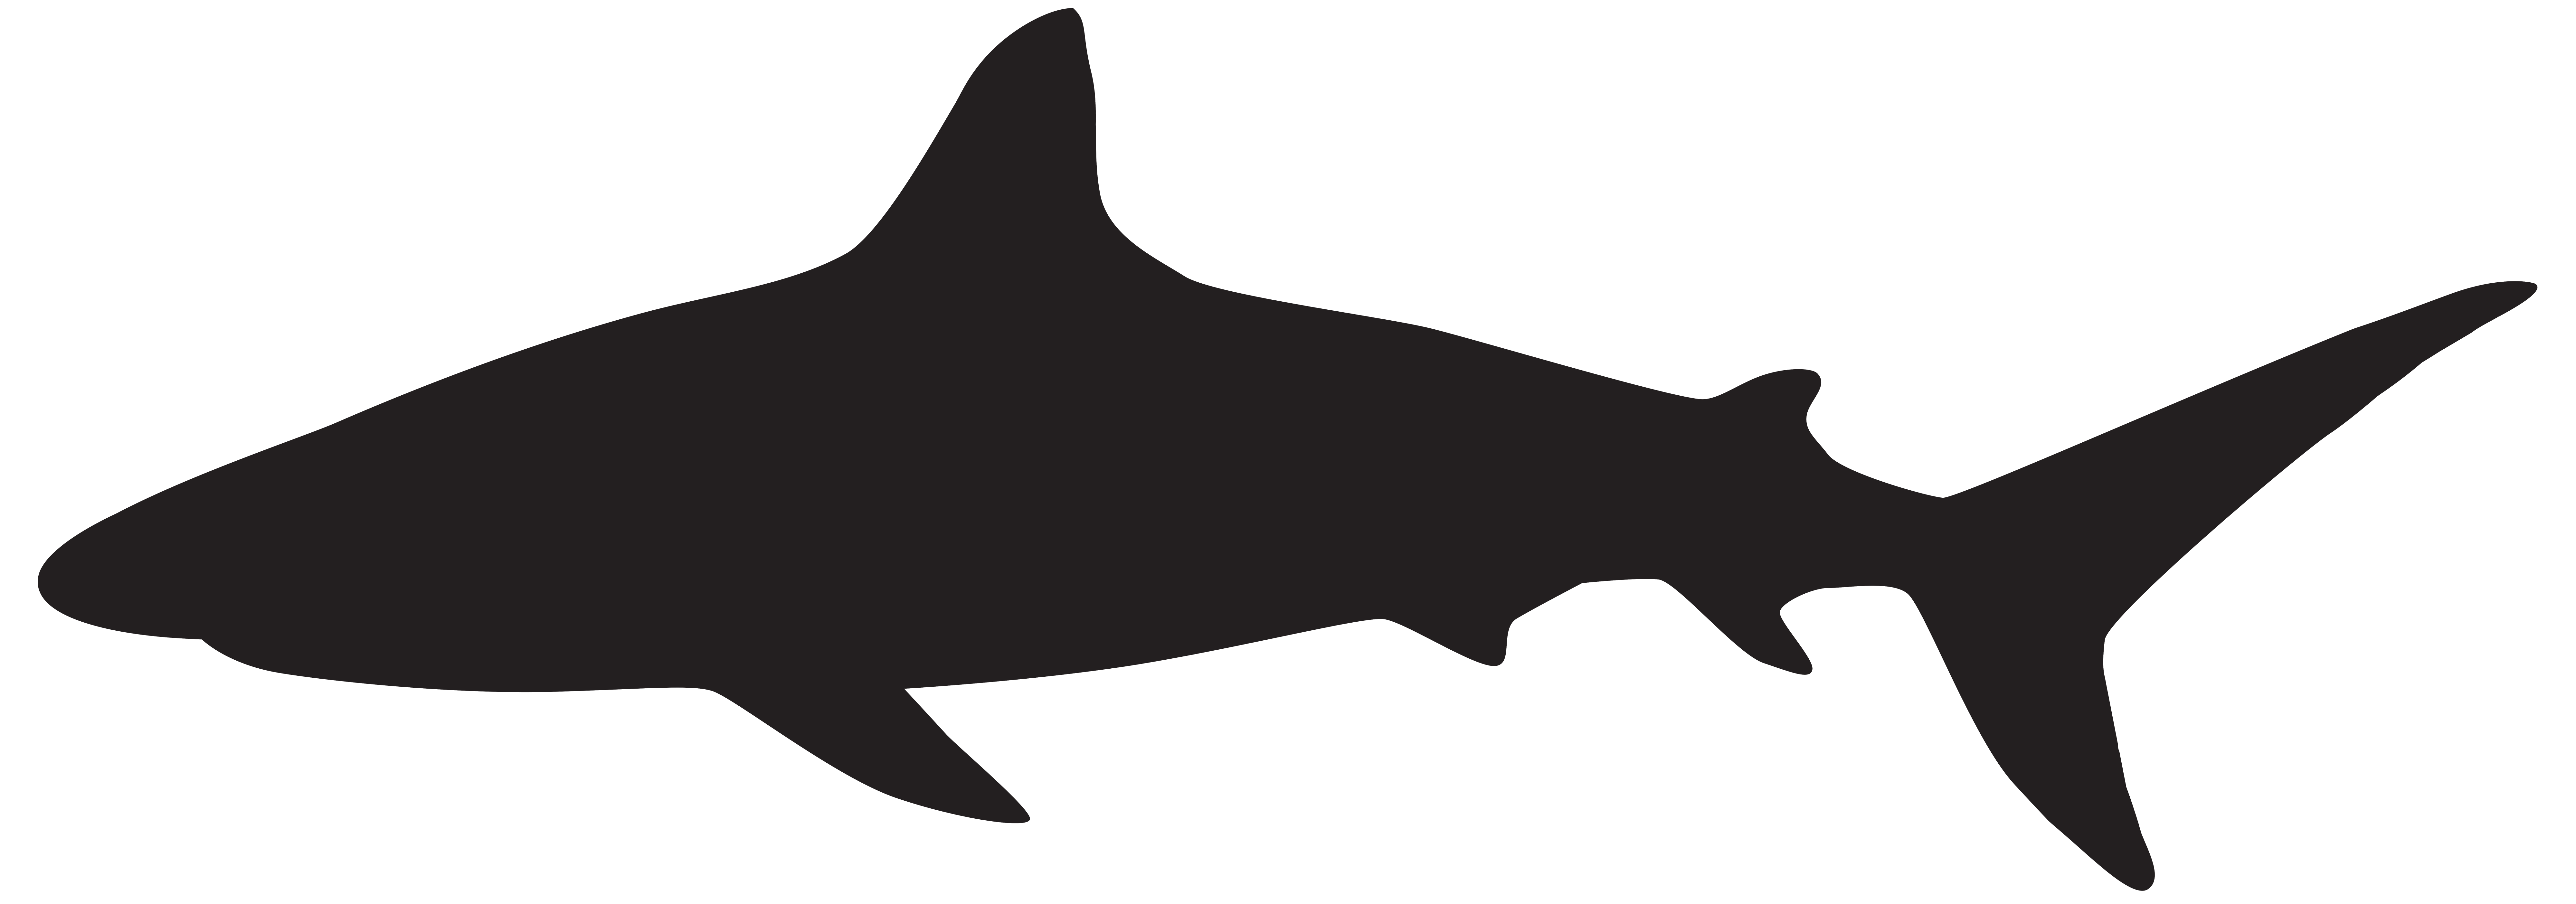 Shark Silhouette PNG Clip Art Image